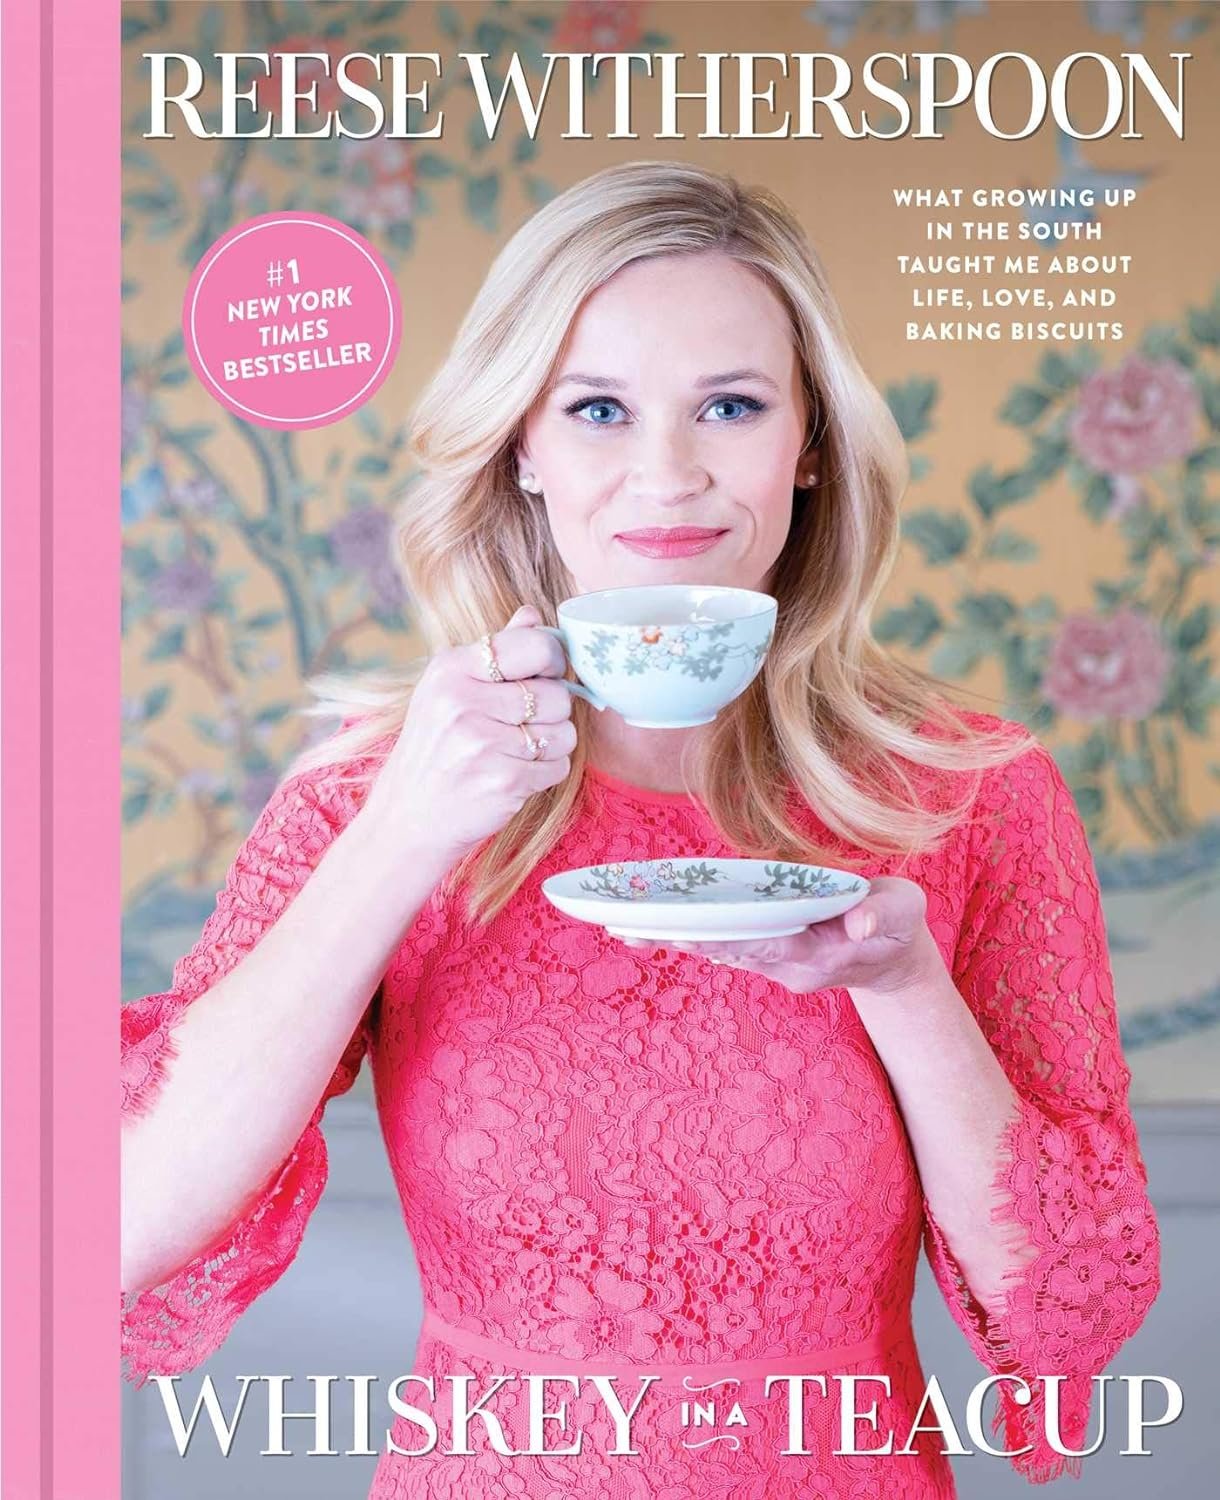 Whiskey in a Teacup by Reese Witherspoon*